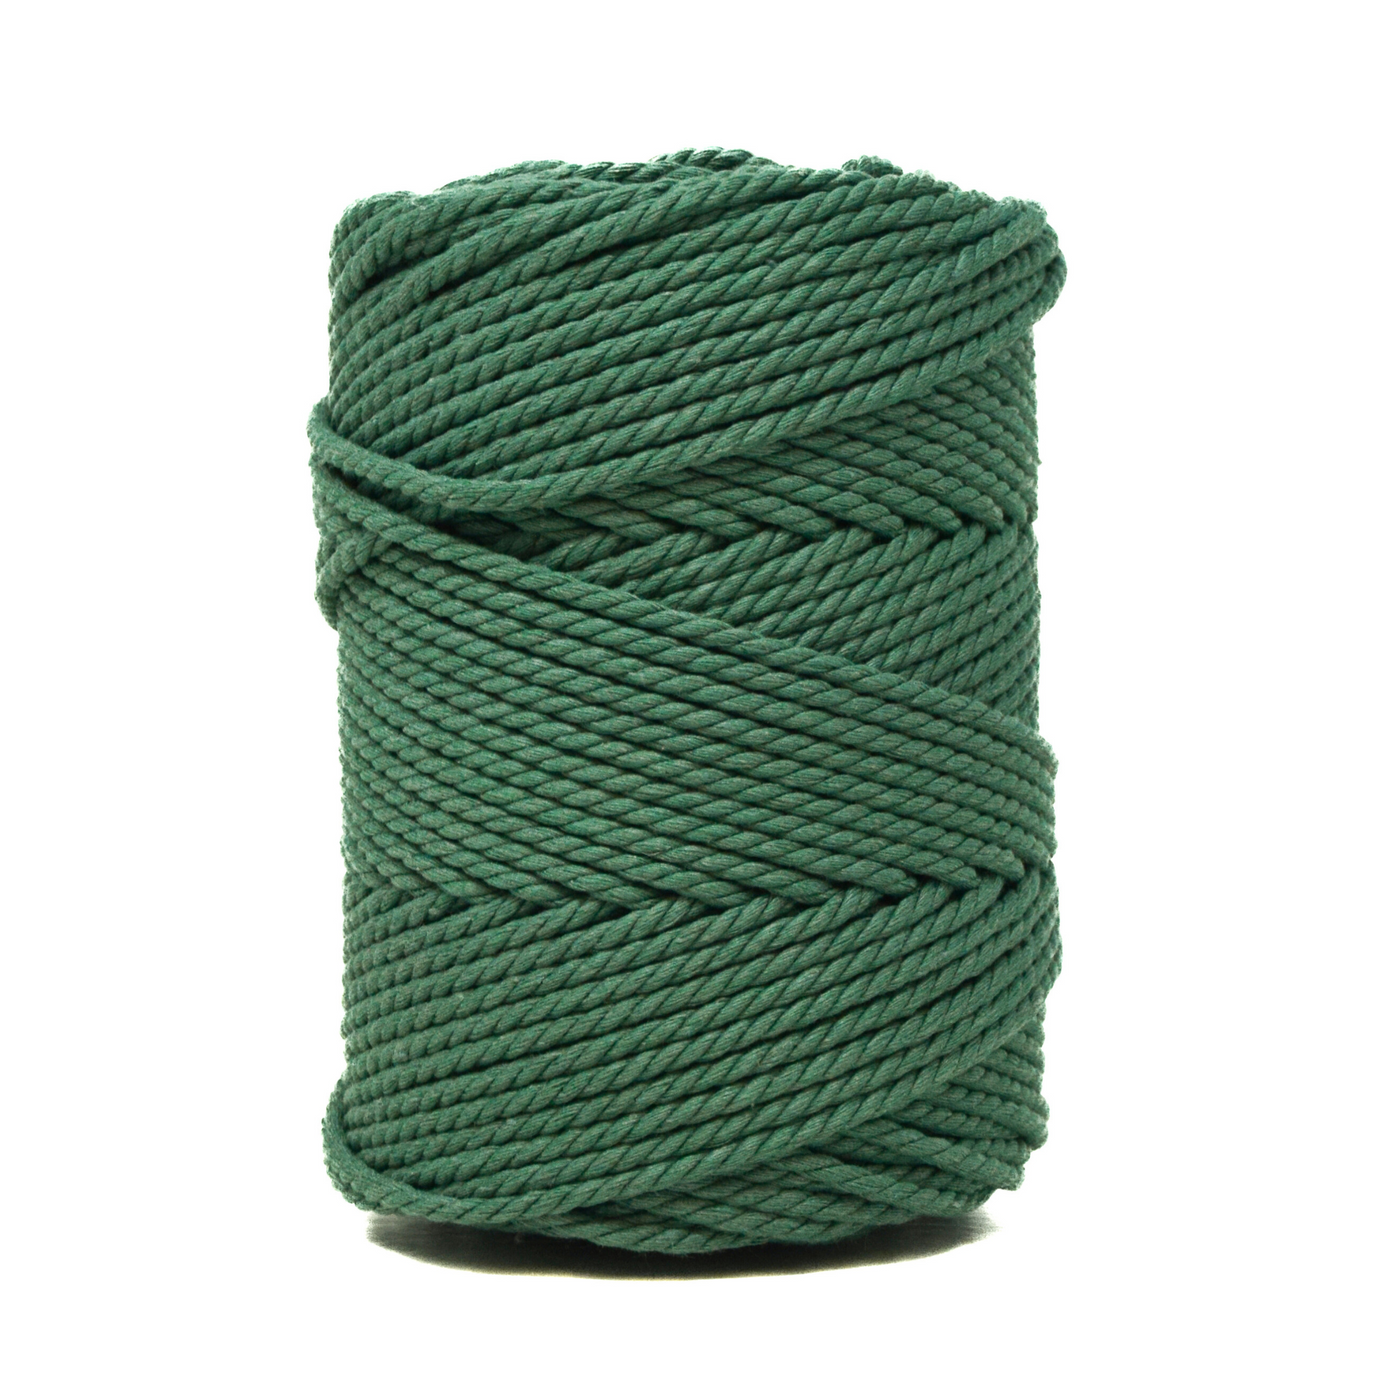 COTTON ROPE ZERO WASTE 3 MM - 3 PLY - PINE GREEN COLOR